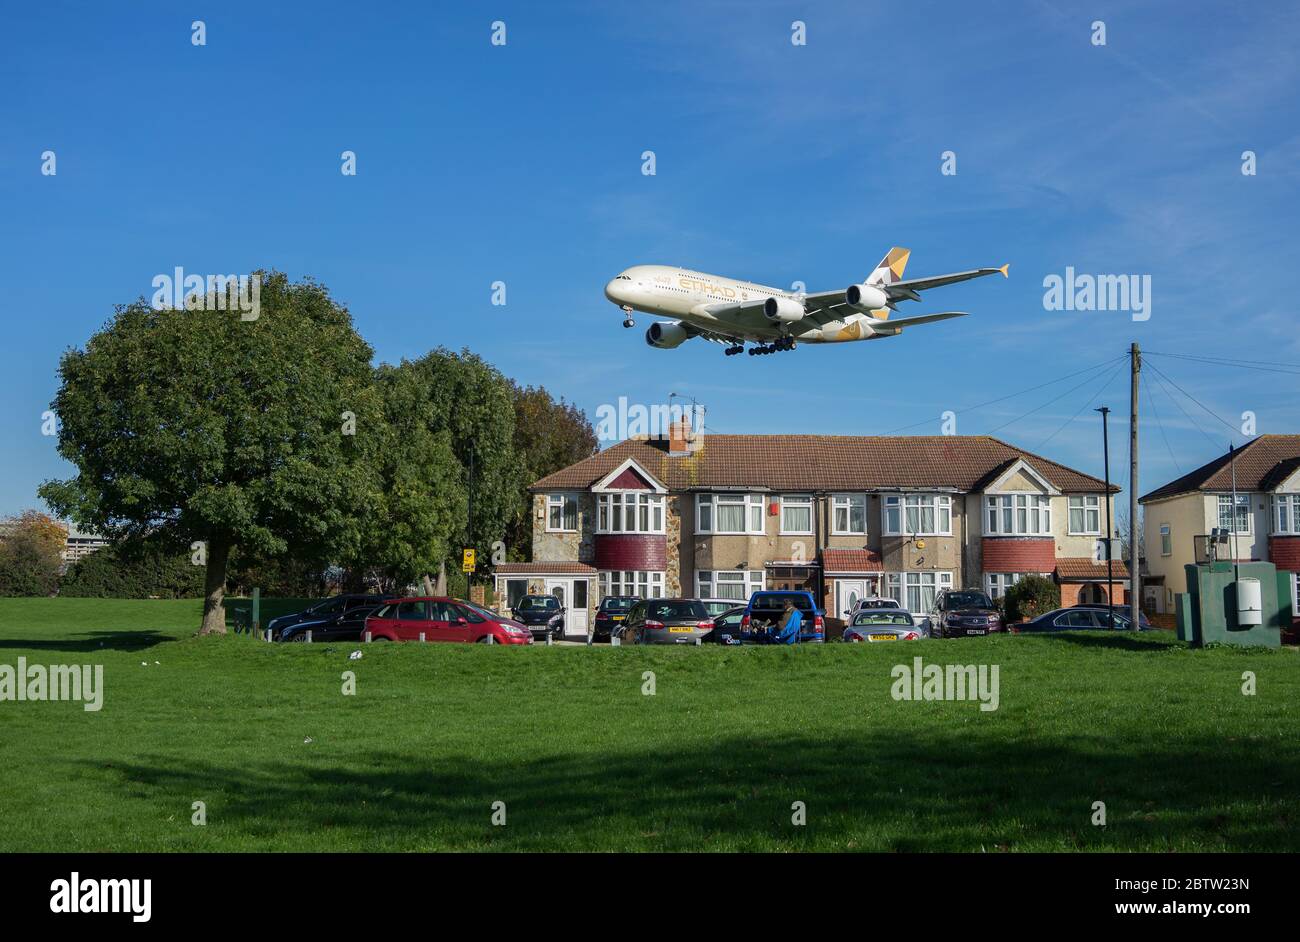 Etihad Airbus A380 landing at Heathrow Airport above residential houses on a sunny day with green grass in foreground. London Stock Photo